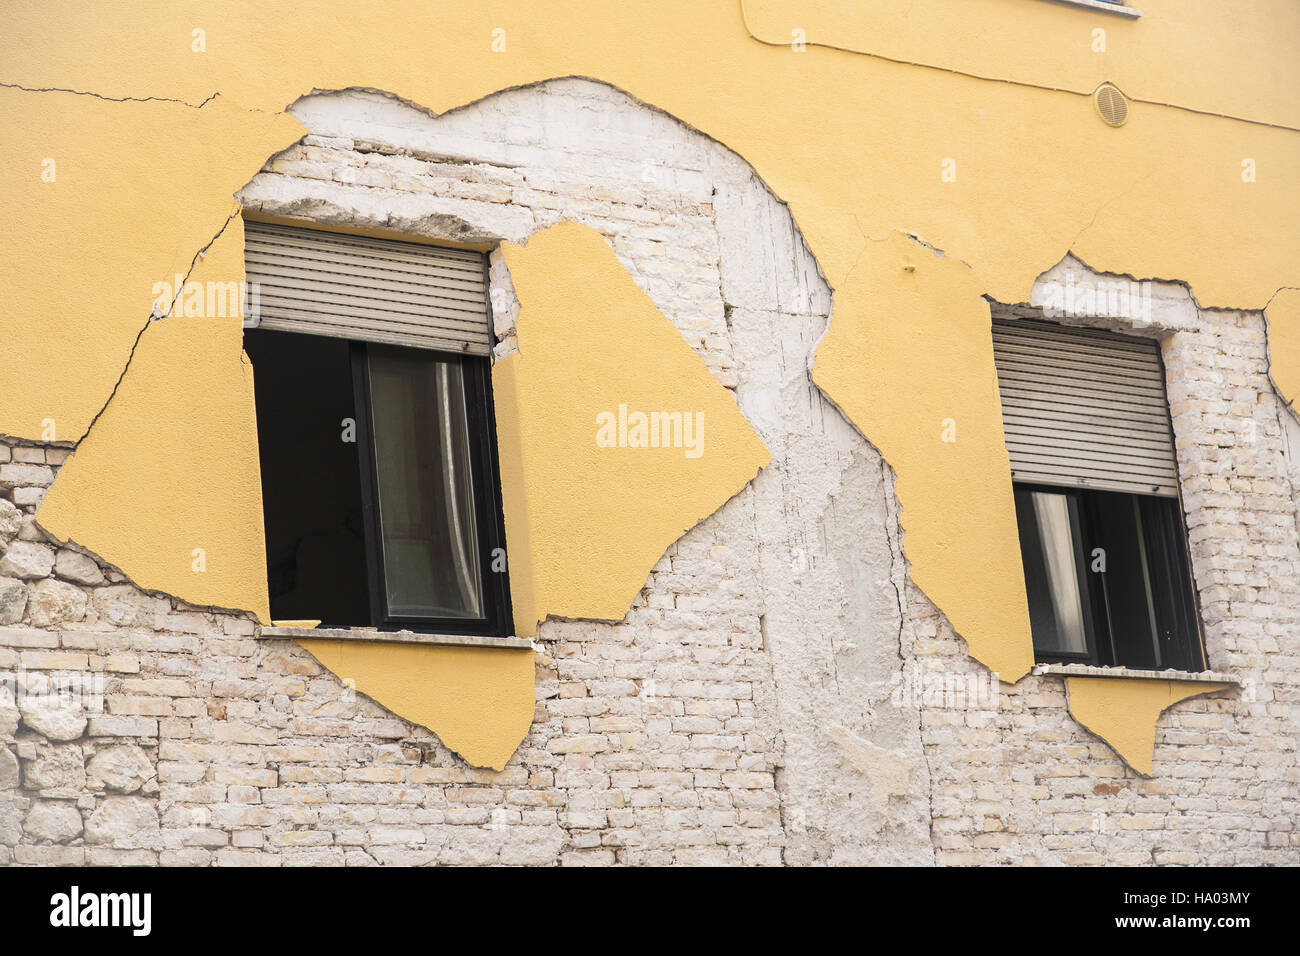 L'AQUILA, ITALY - APRIL 6, 2009: L'Aquila in the Abruzzo region in Italy. Remains of the city destroyed by a strong earthquake. Stock Photo